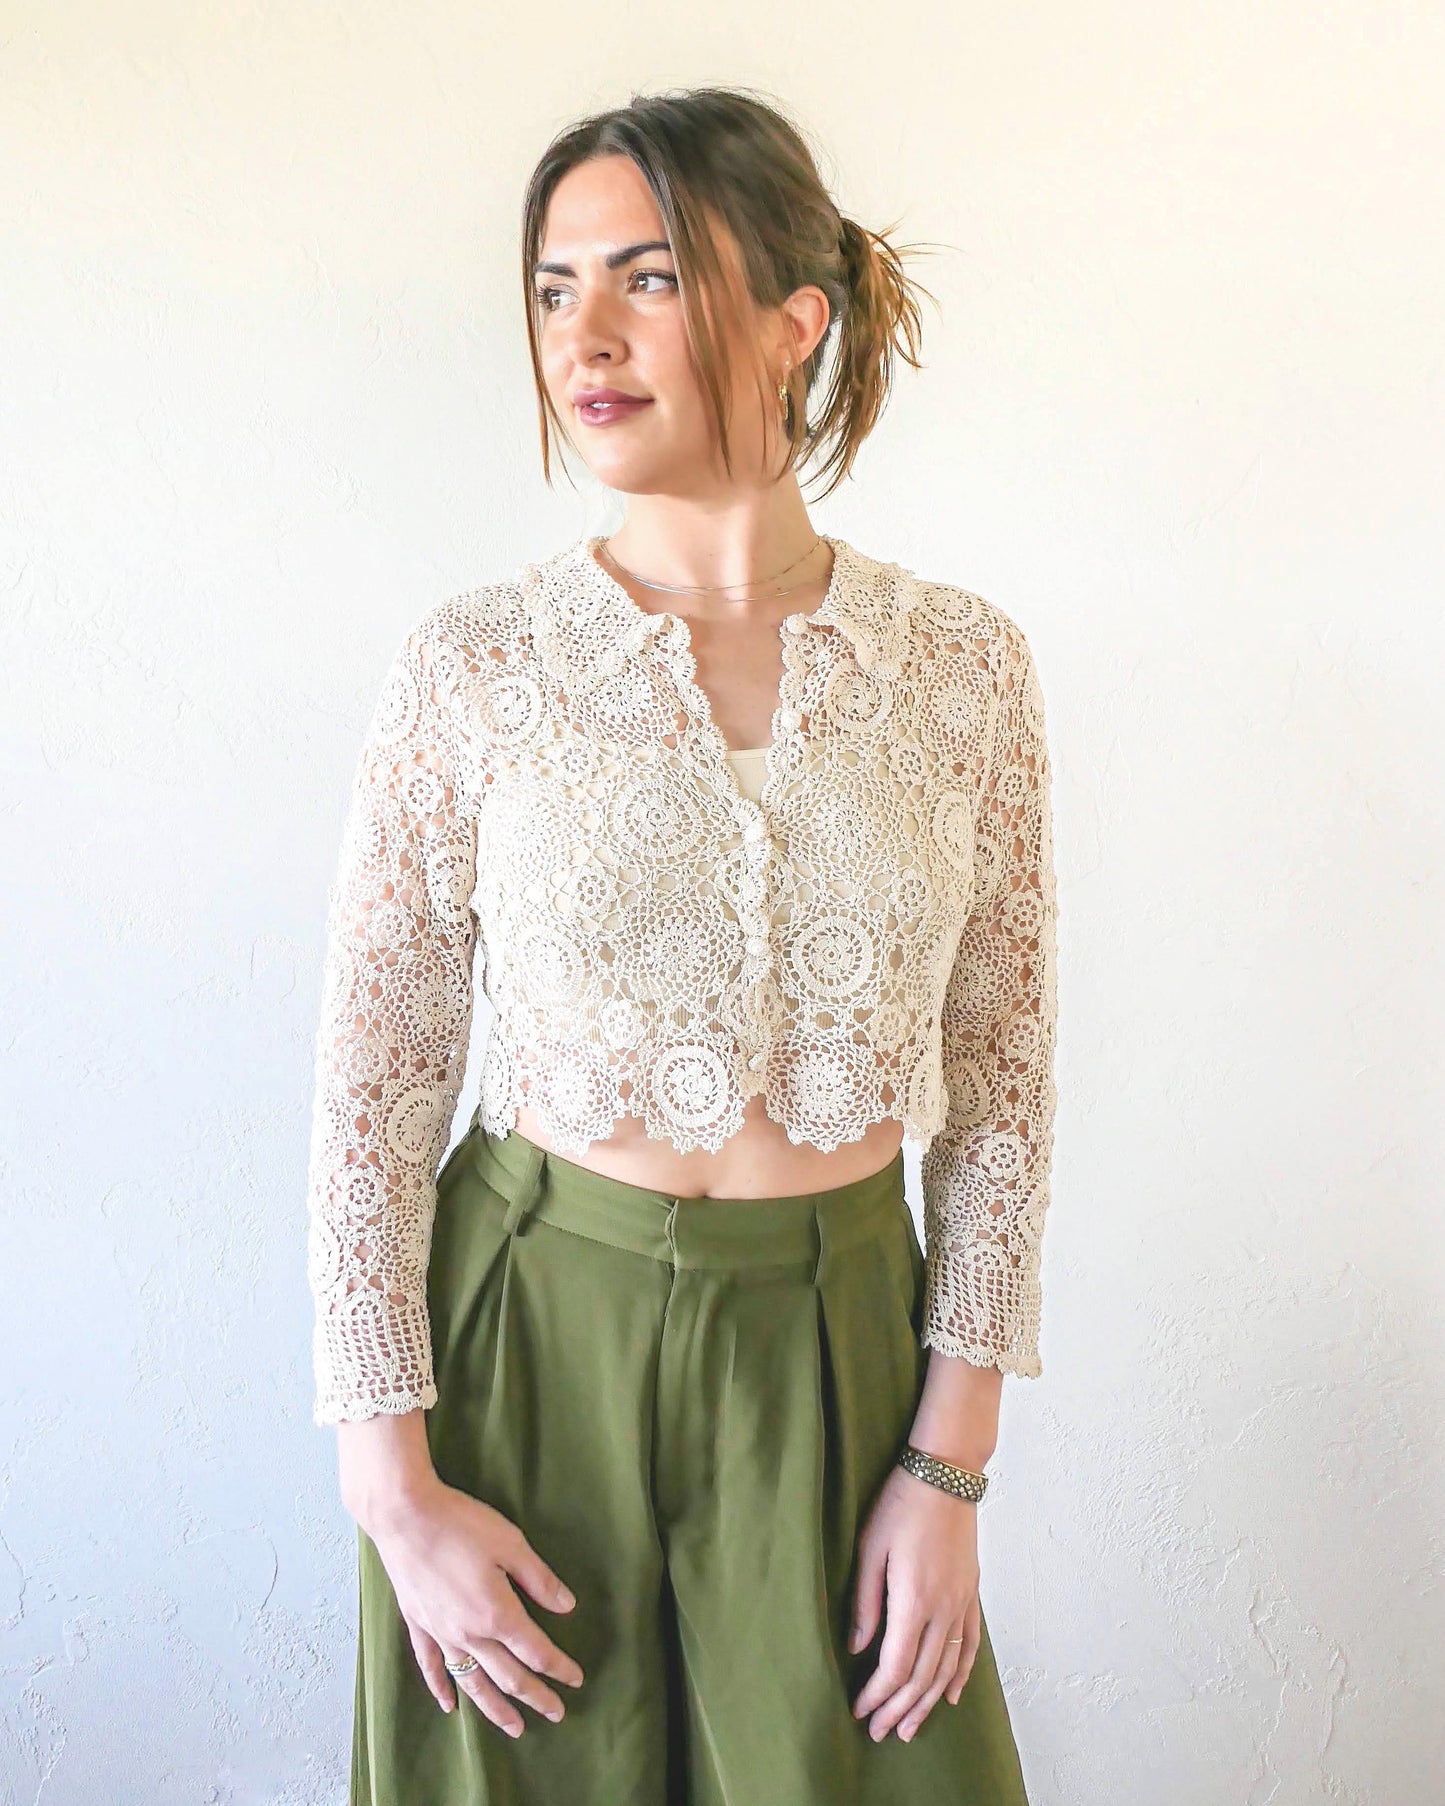 A versatile and boho chic hand crocheted cropped cardigan sweater with a unique, repeating kaleidoscope-like floral pattern throughout. Dress it down with a pair of jeans and sandals, or dress it up with neutral colored wide leg pants, heels, and a pair of vintage dangly earrings.